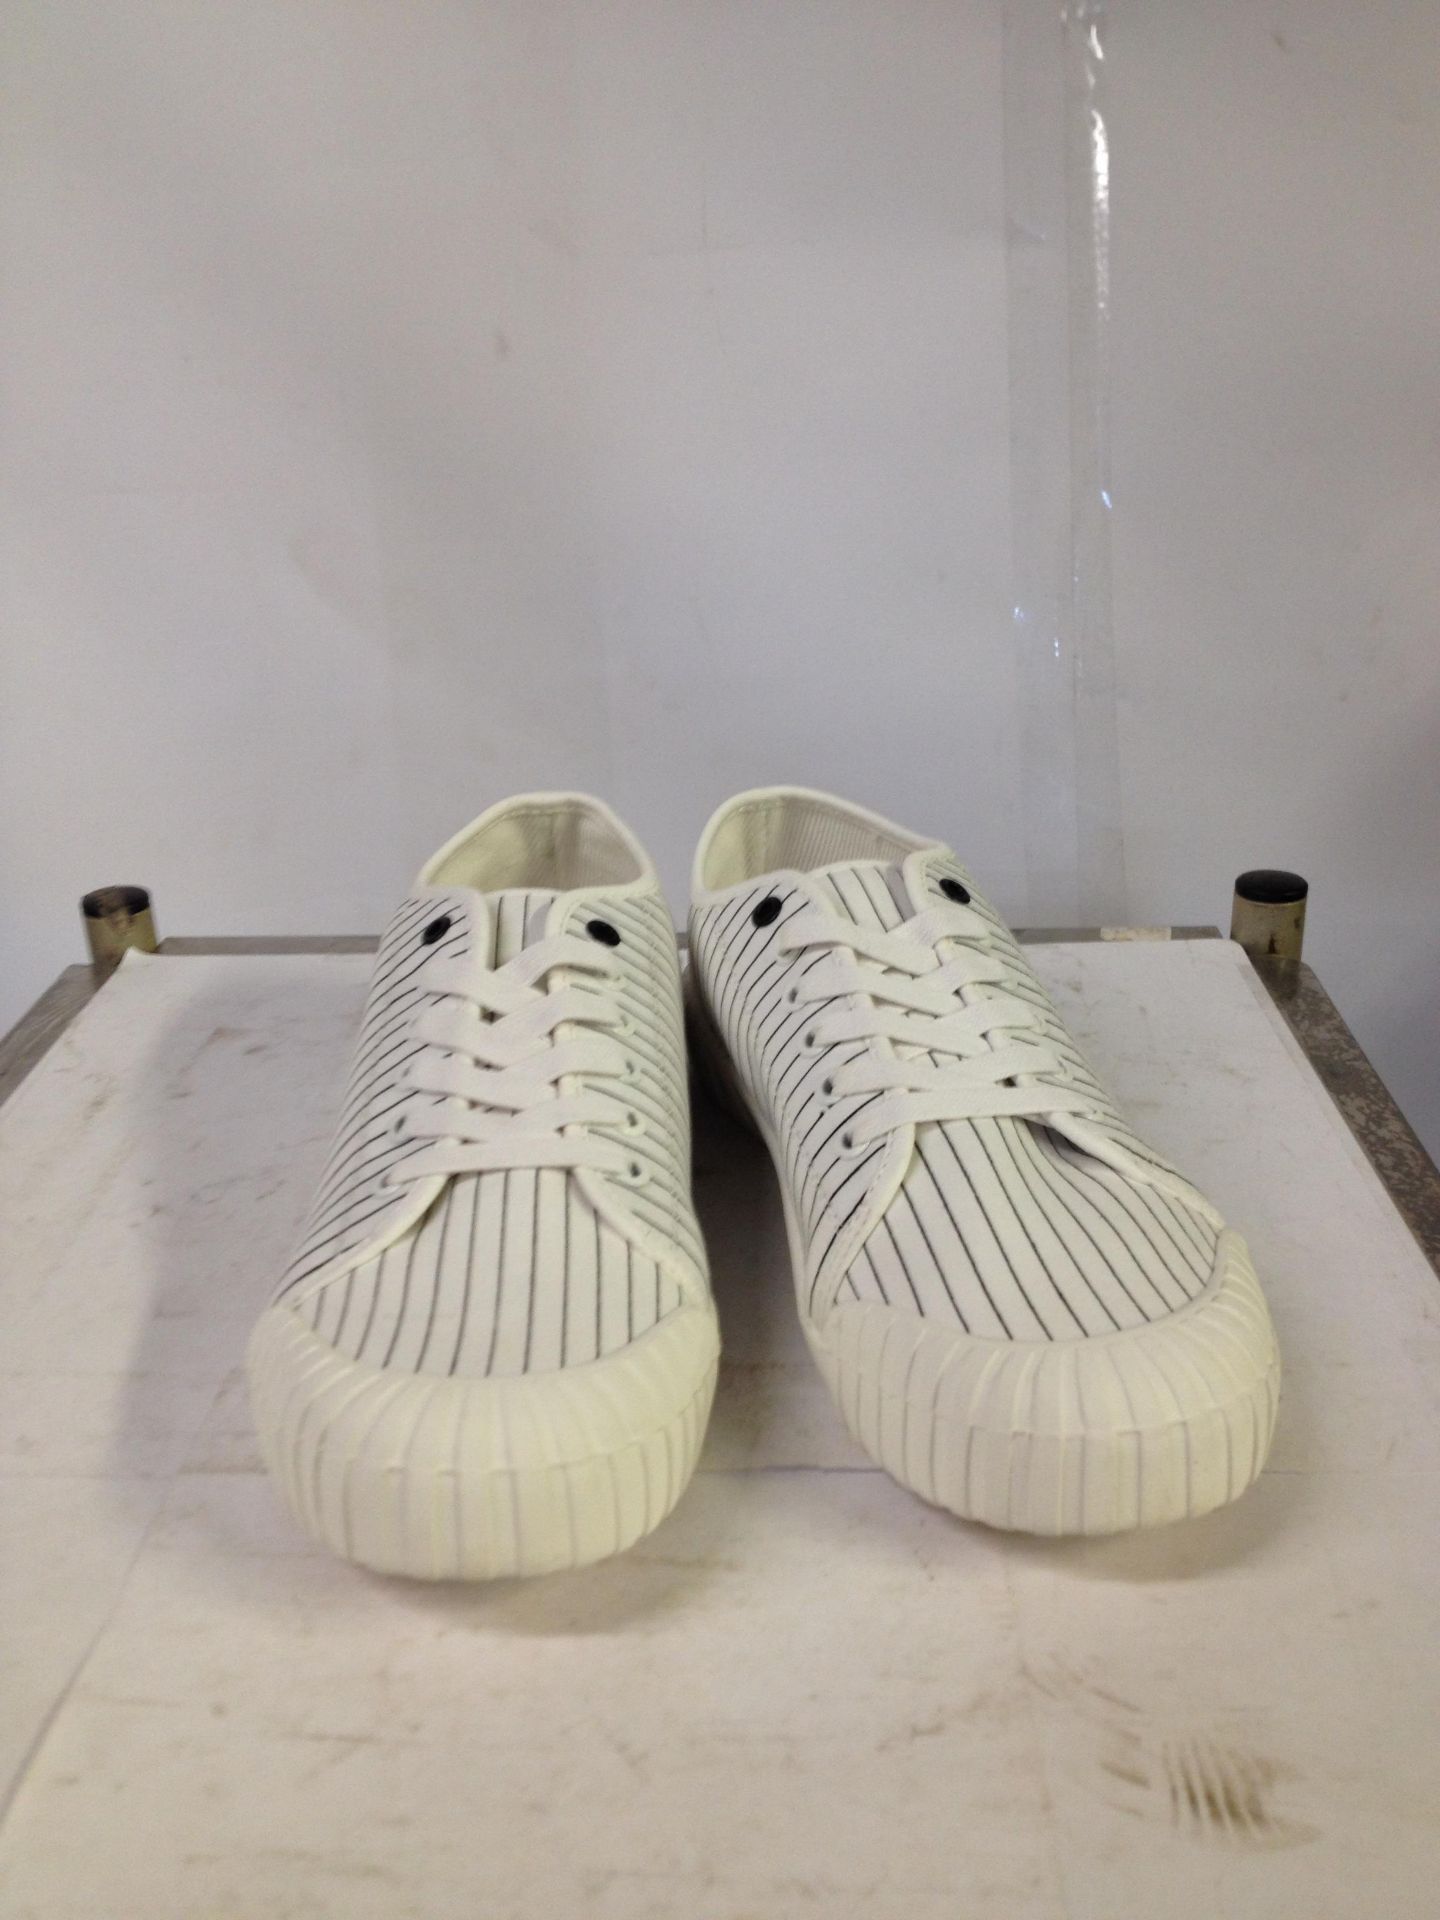 1 x Good News Trainers | Stripe Cotton Canvas-Natural Rubber | Colour: White | UK Size: 9 | RRP £ 6 - Image 2 of 2